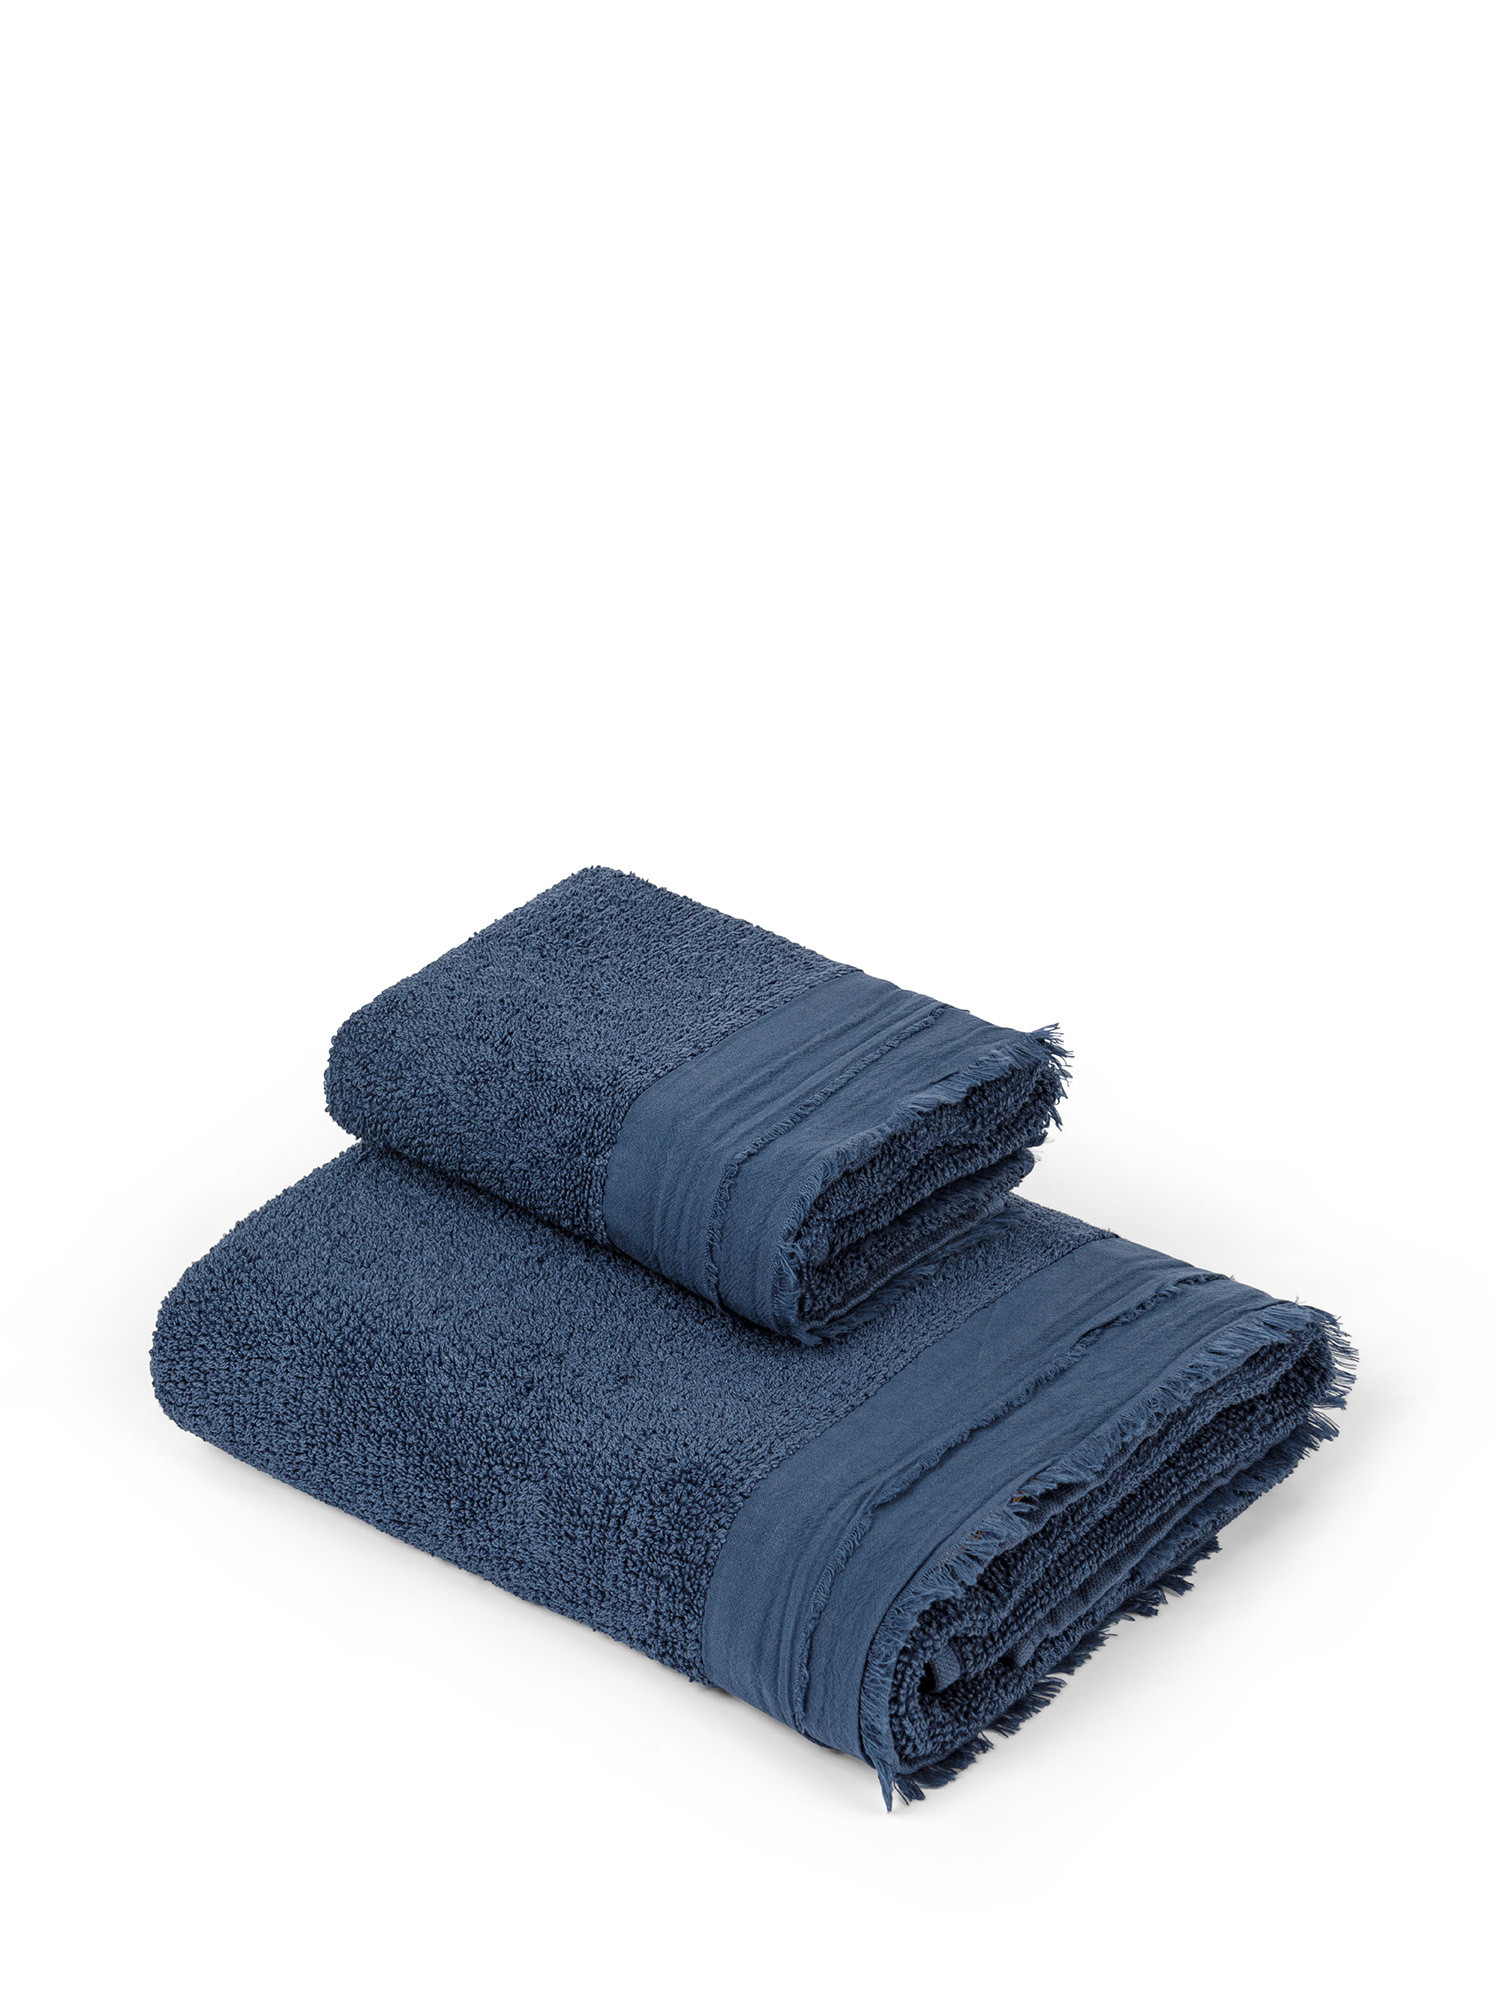 Cotton terry towel with ruffles, Blue, large image number 0